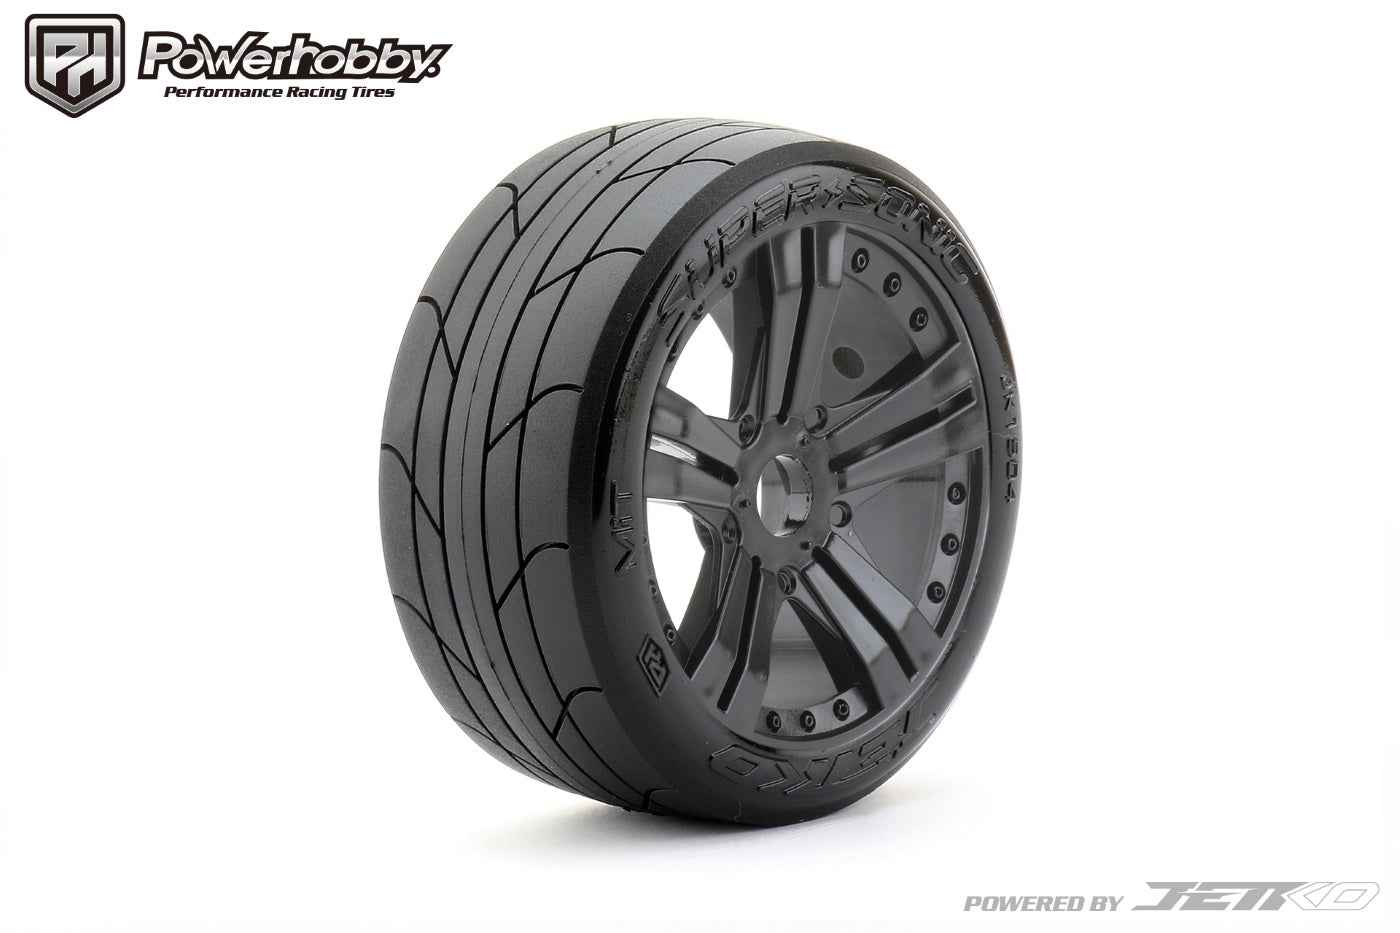 Powerhobby 1/8 Buggy Super Sonic Tires Mounted on Black Claw Rims - PowerHobby